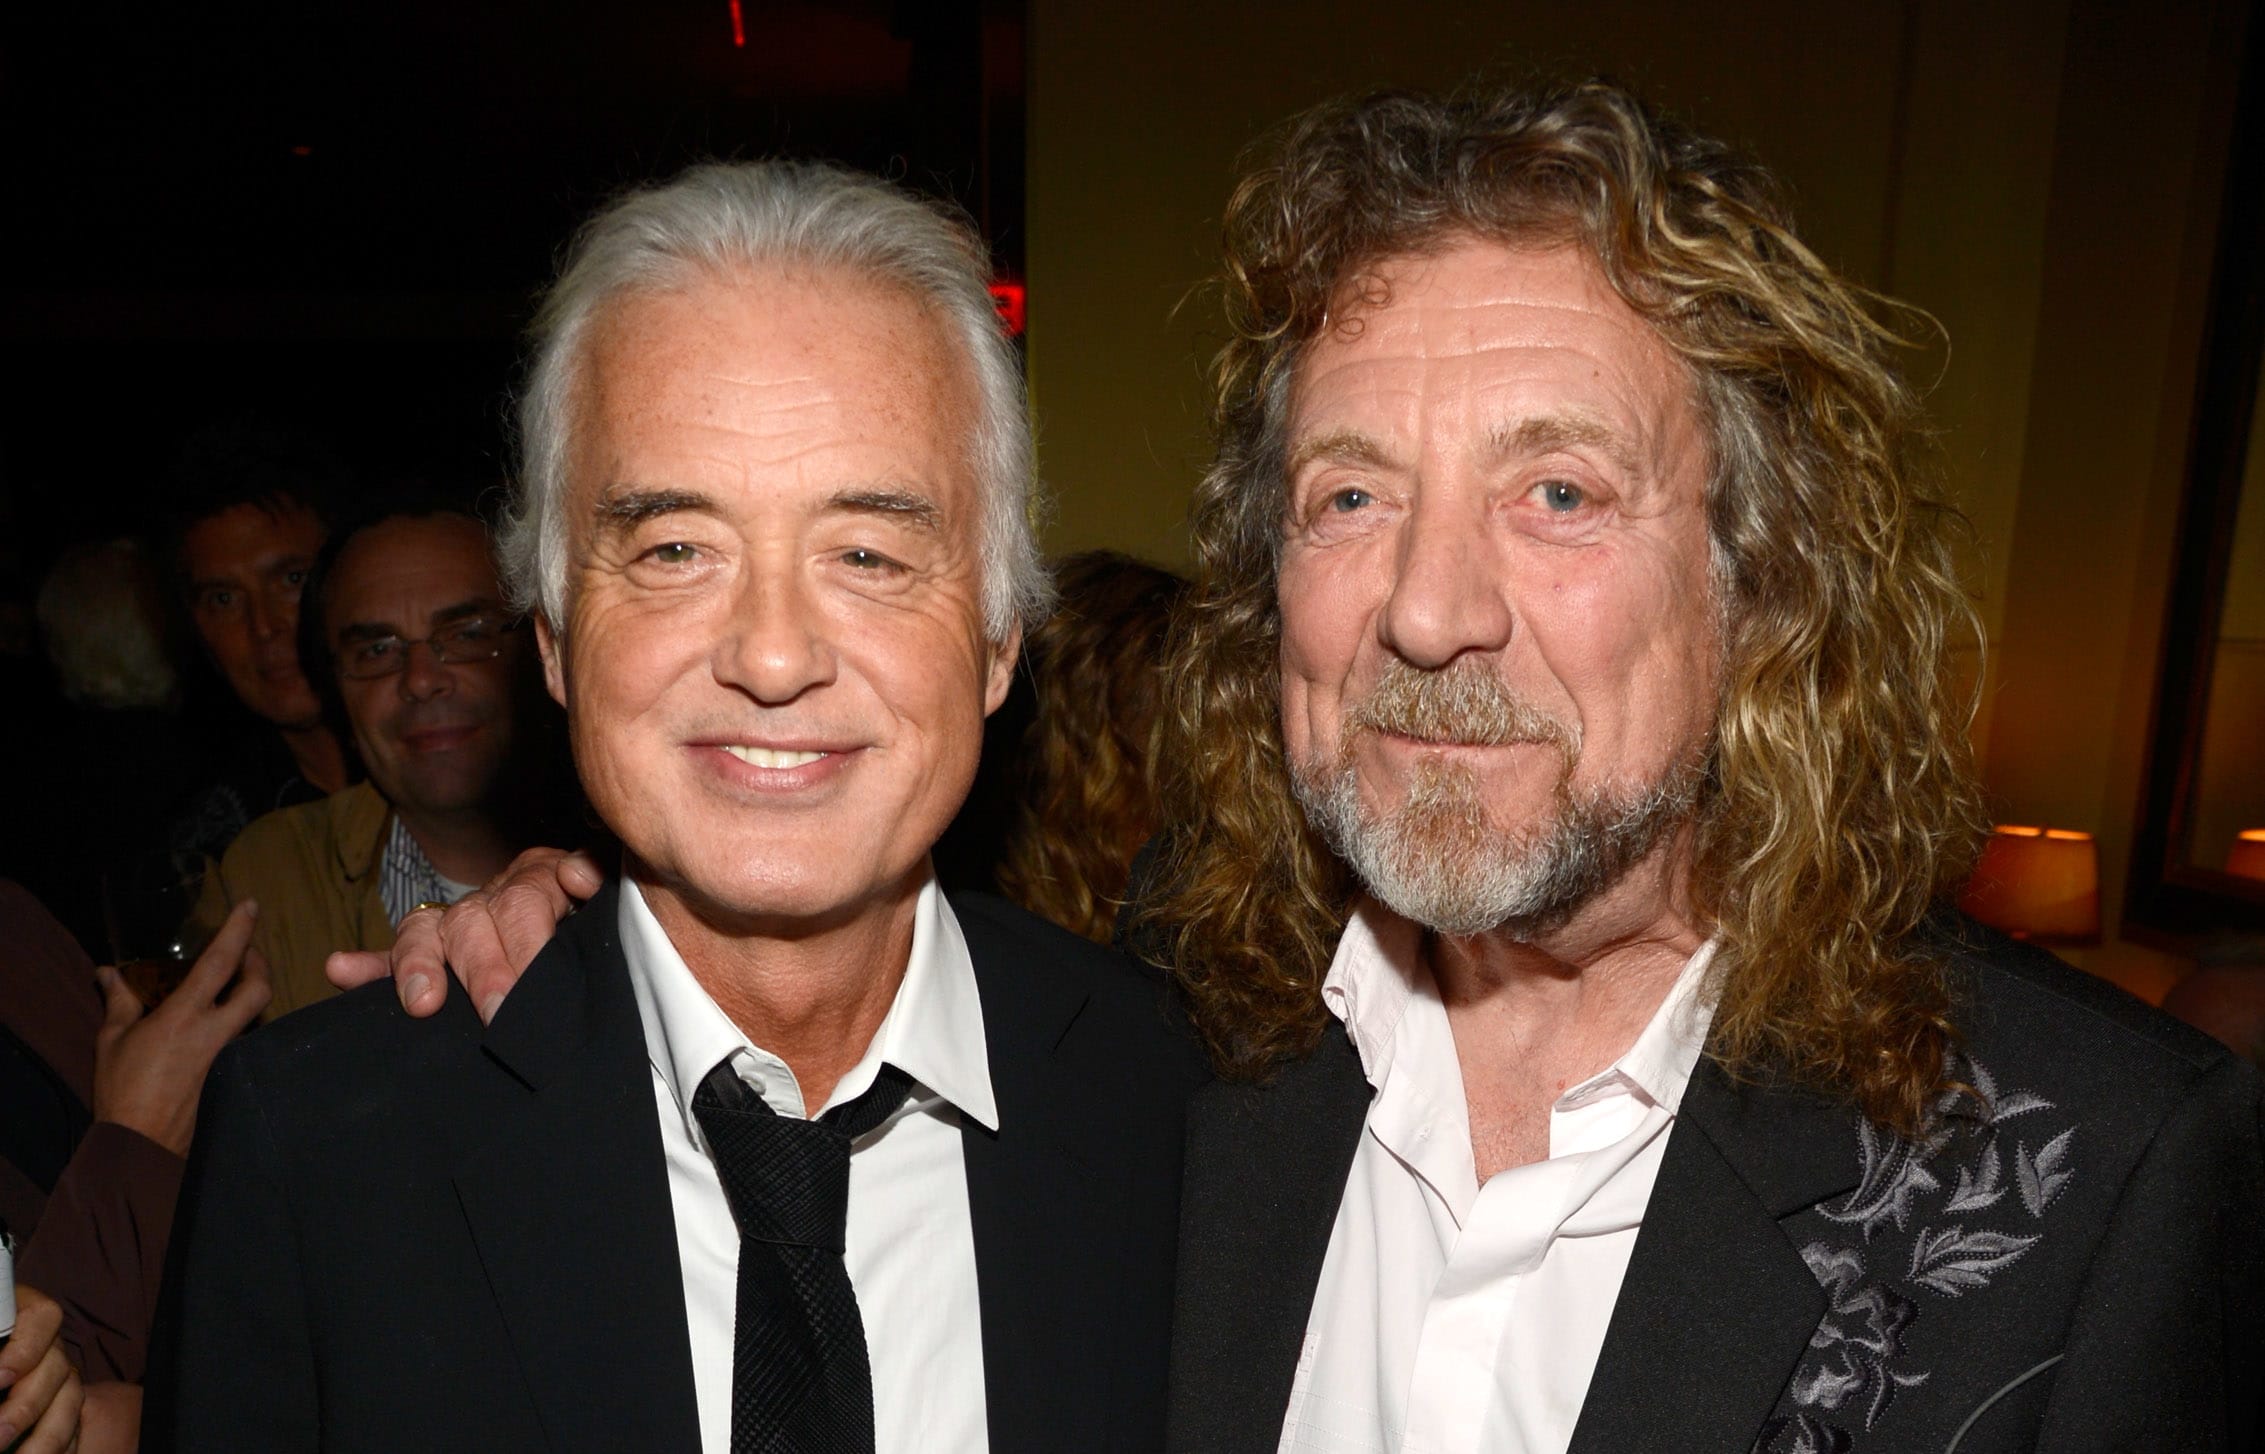 Led Zeppelin's Jimmy Page, left, and Robert Plant